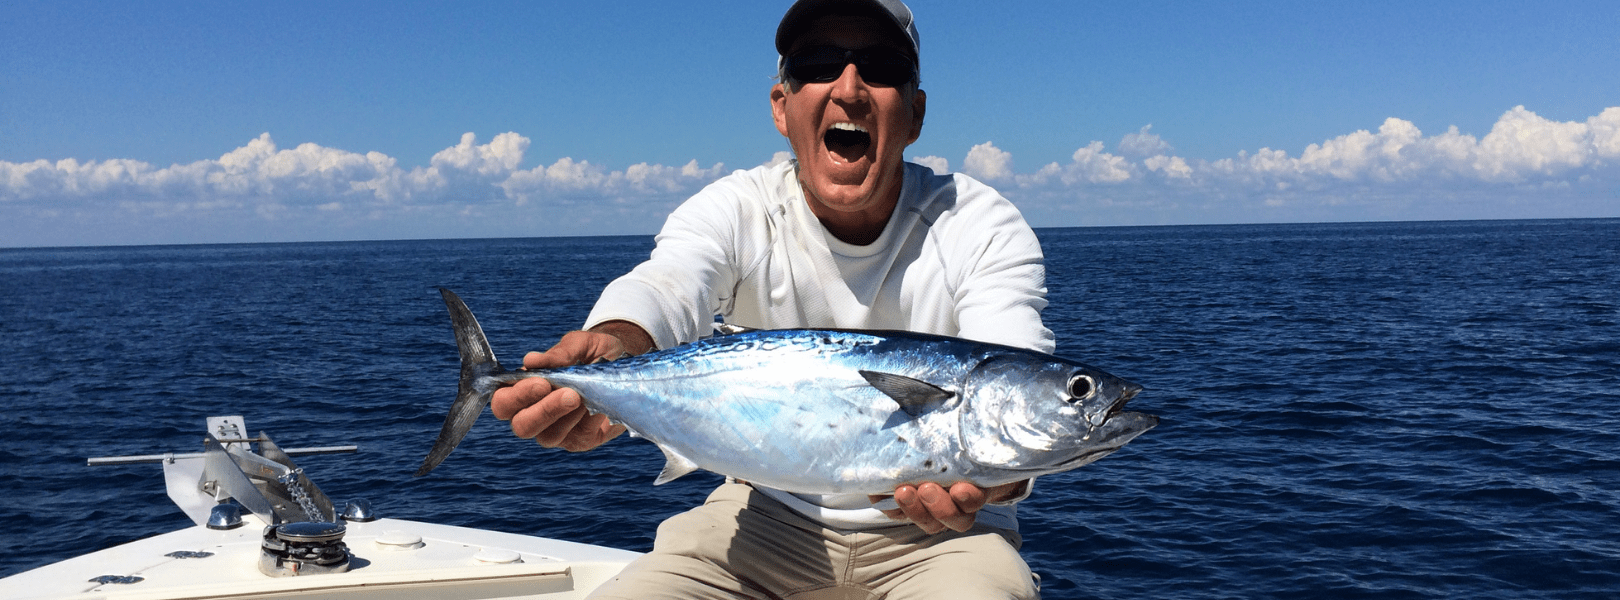 Things to Do - Naples - Fishing - hero images-min